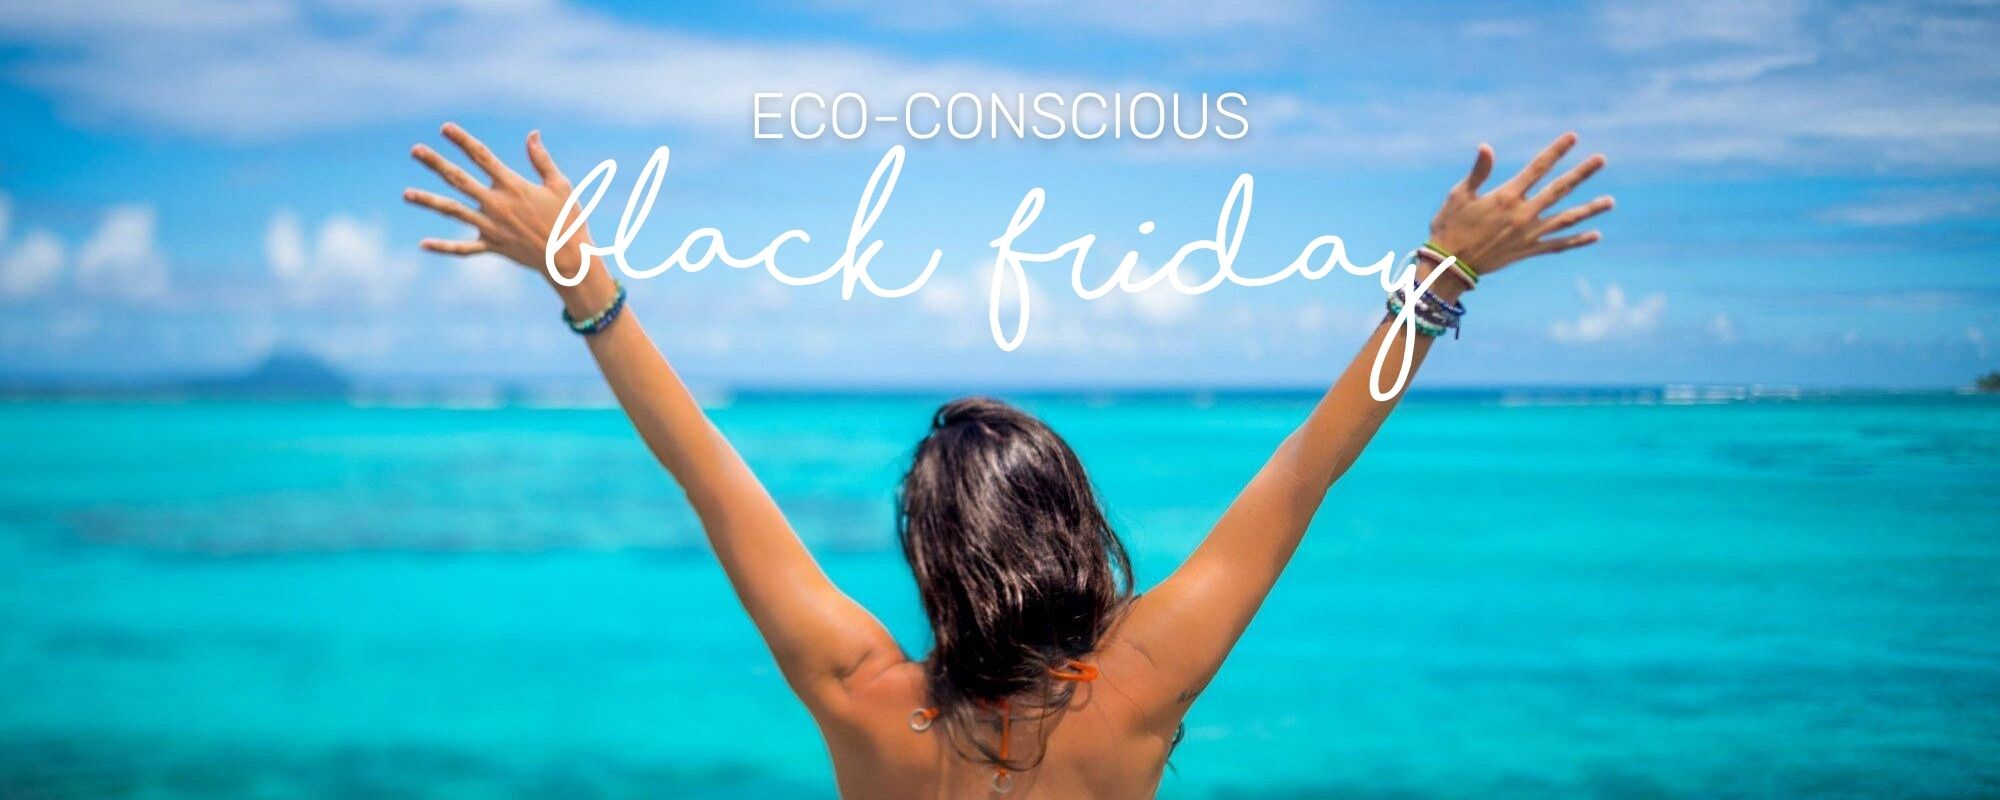 BE ECO-CONSCIOUS THIS BLACK FRIDAY WITH 25% OFF!